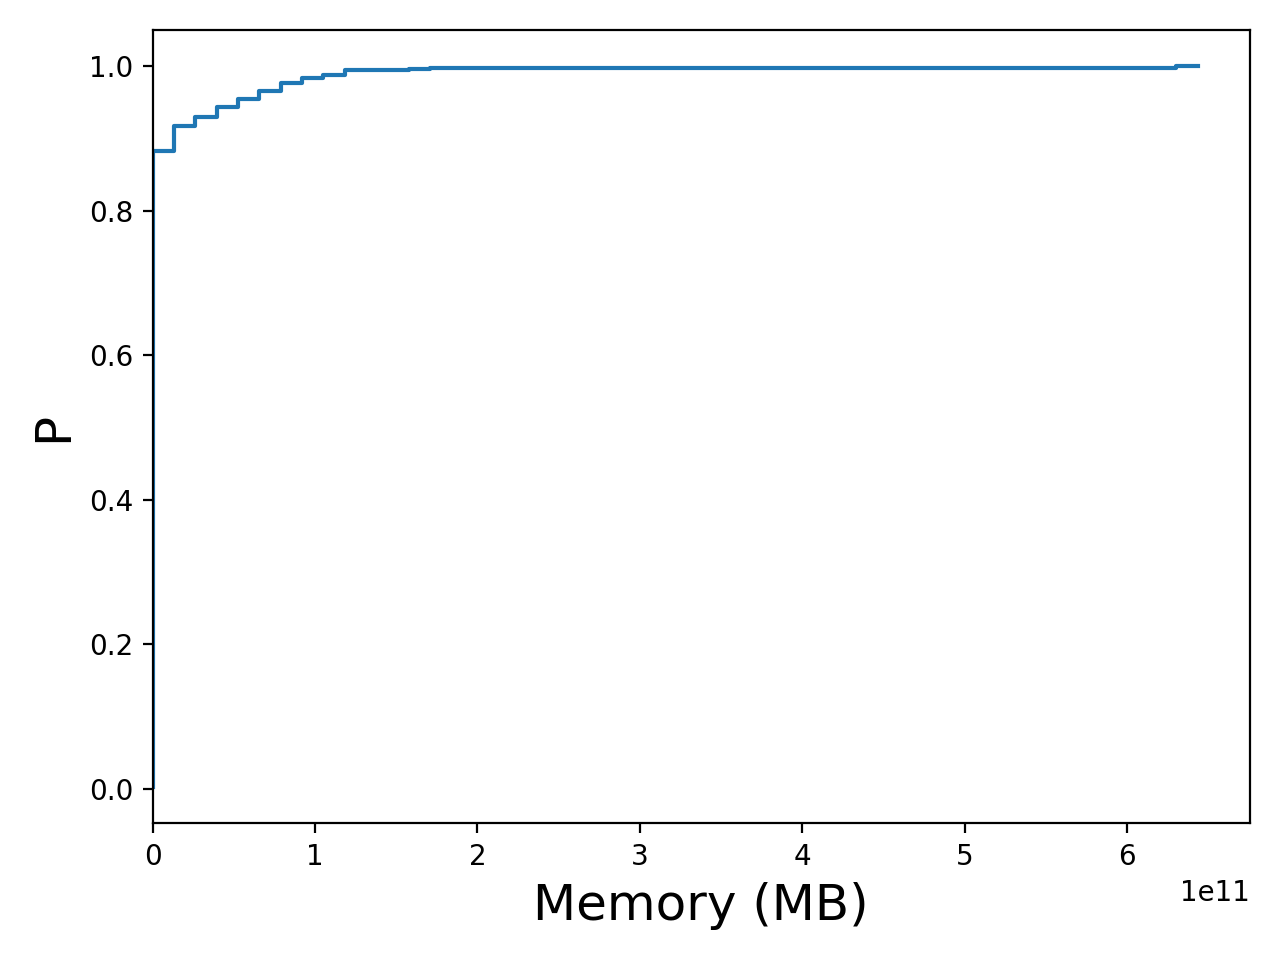 Task memory consumption graph for the Galaxy trace.